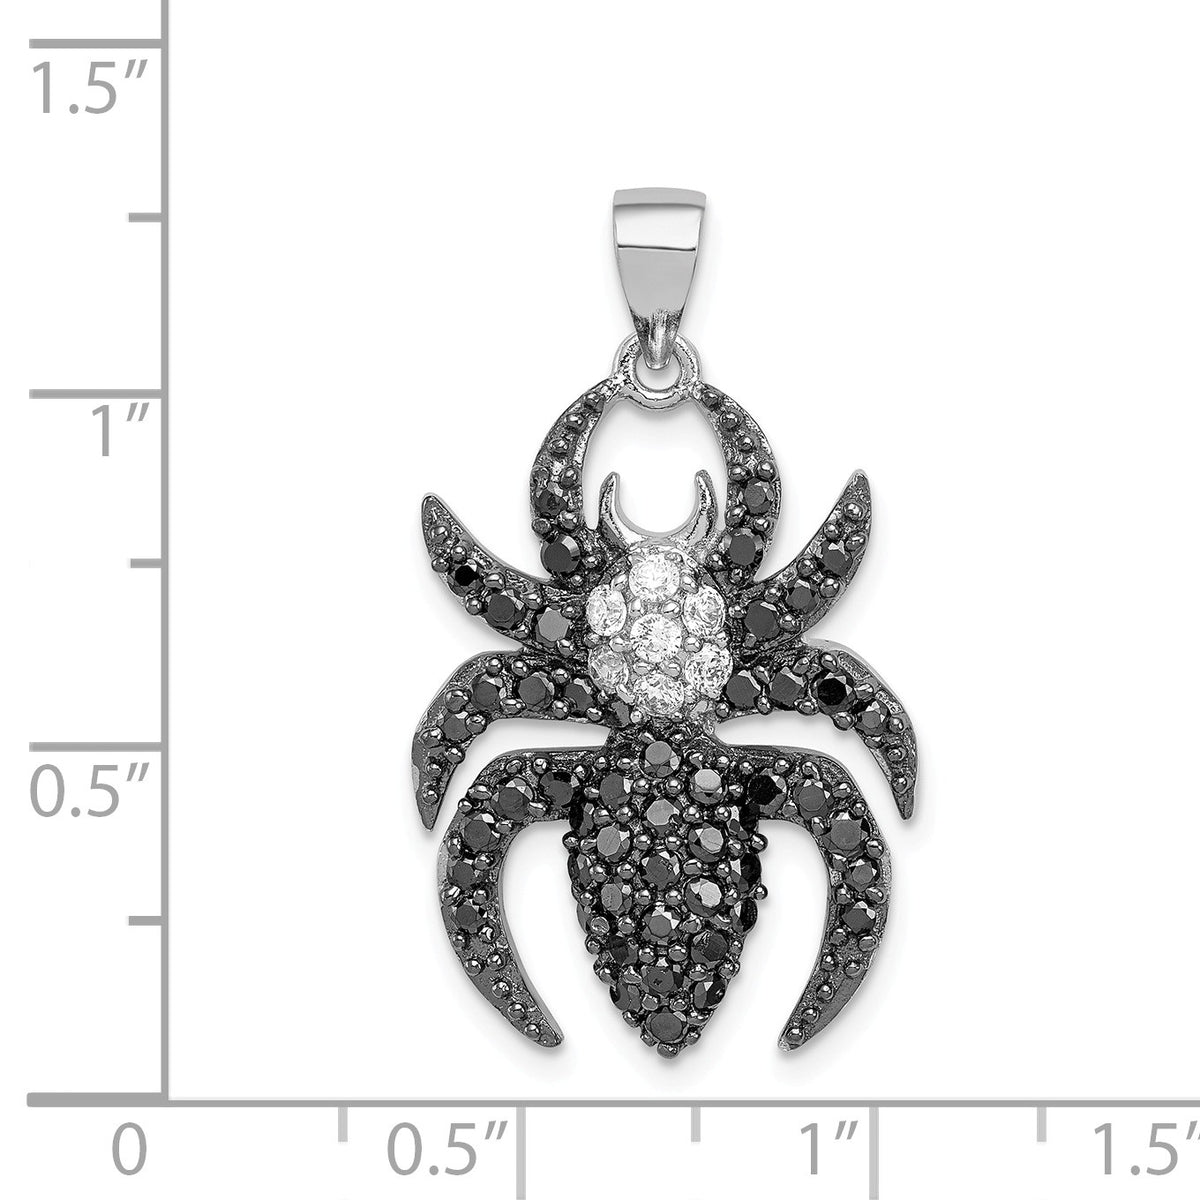 Alternate view of the Sterling Silver and CZ Large Black and White Spider Pendant by The Black Bow Jewelry Co.